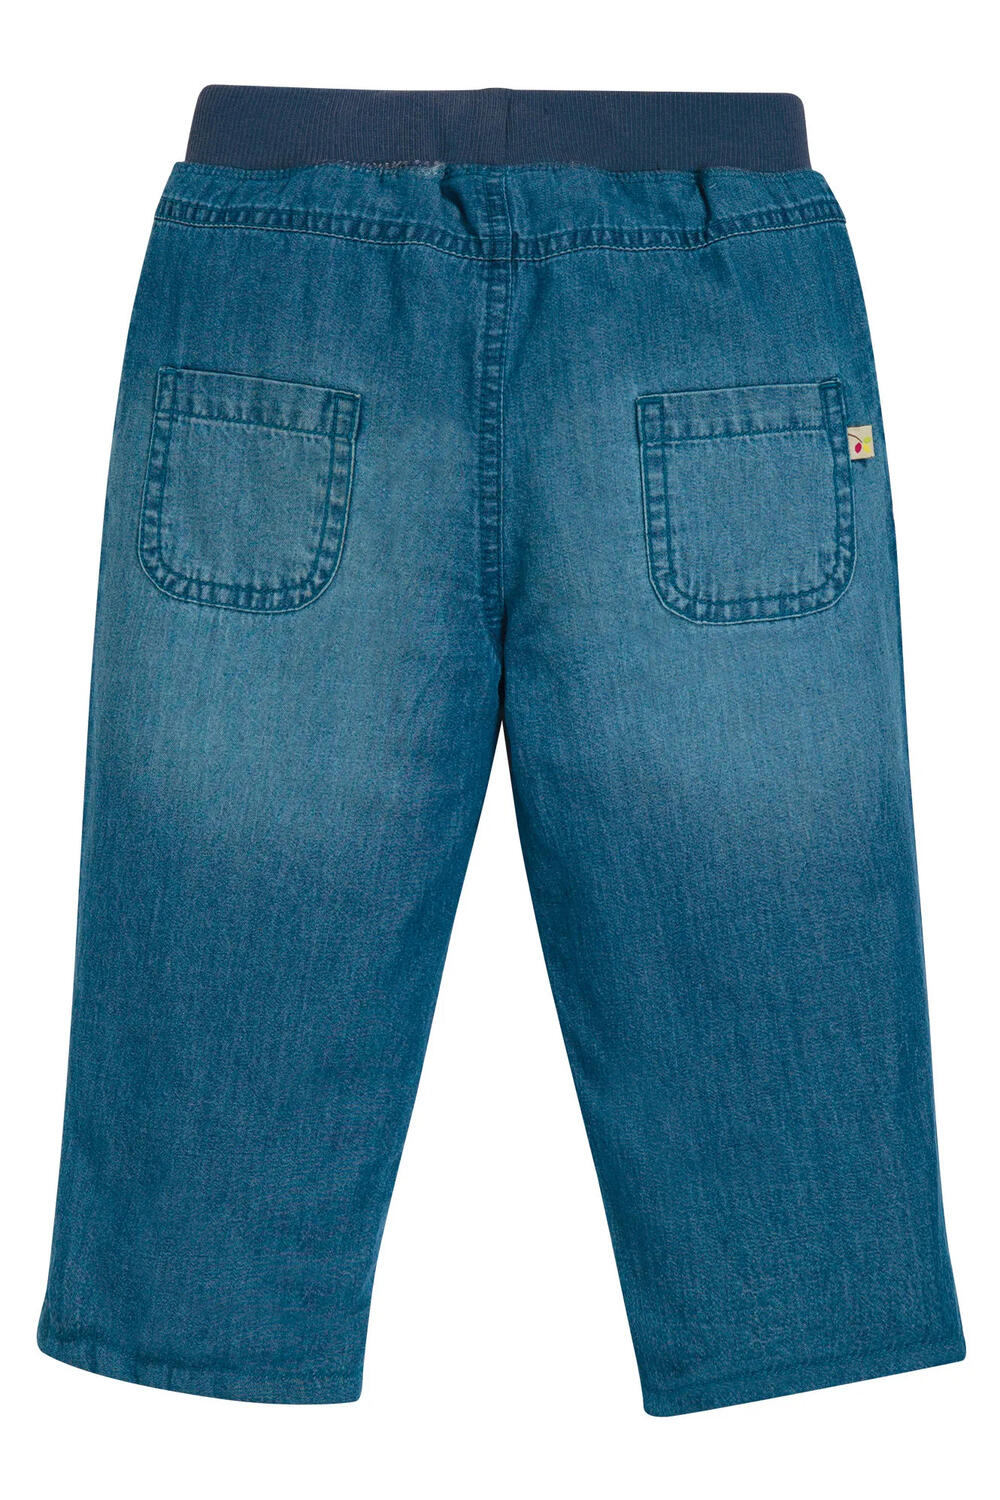 Frugi Comfy Lined Jeans (Größe: 12-18 Monate / Farbe: Chambray)